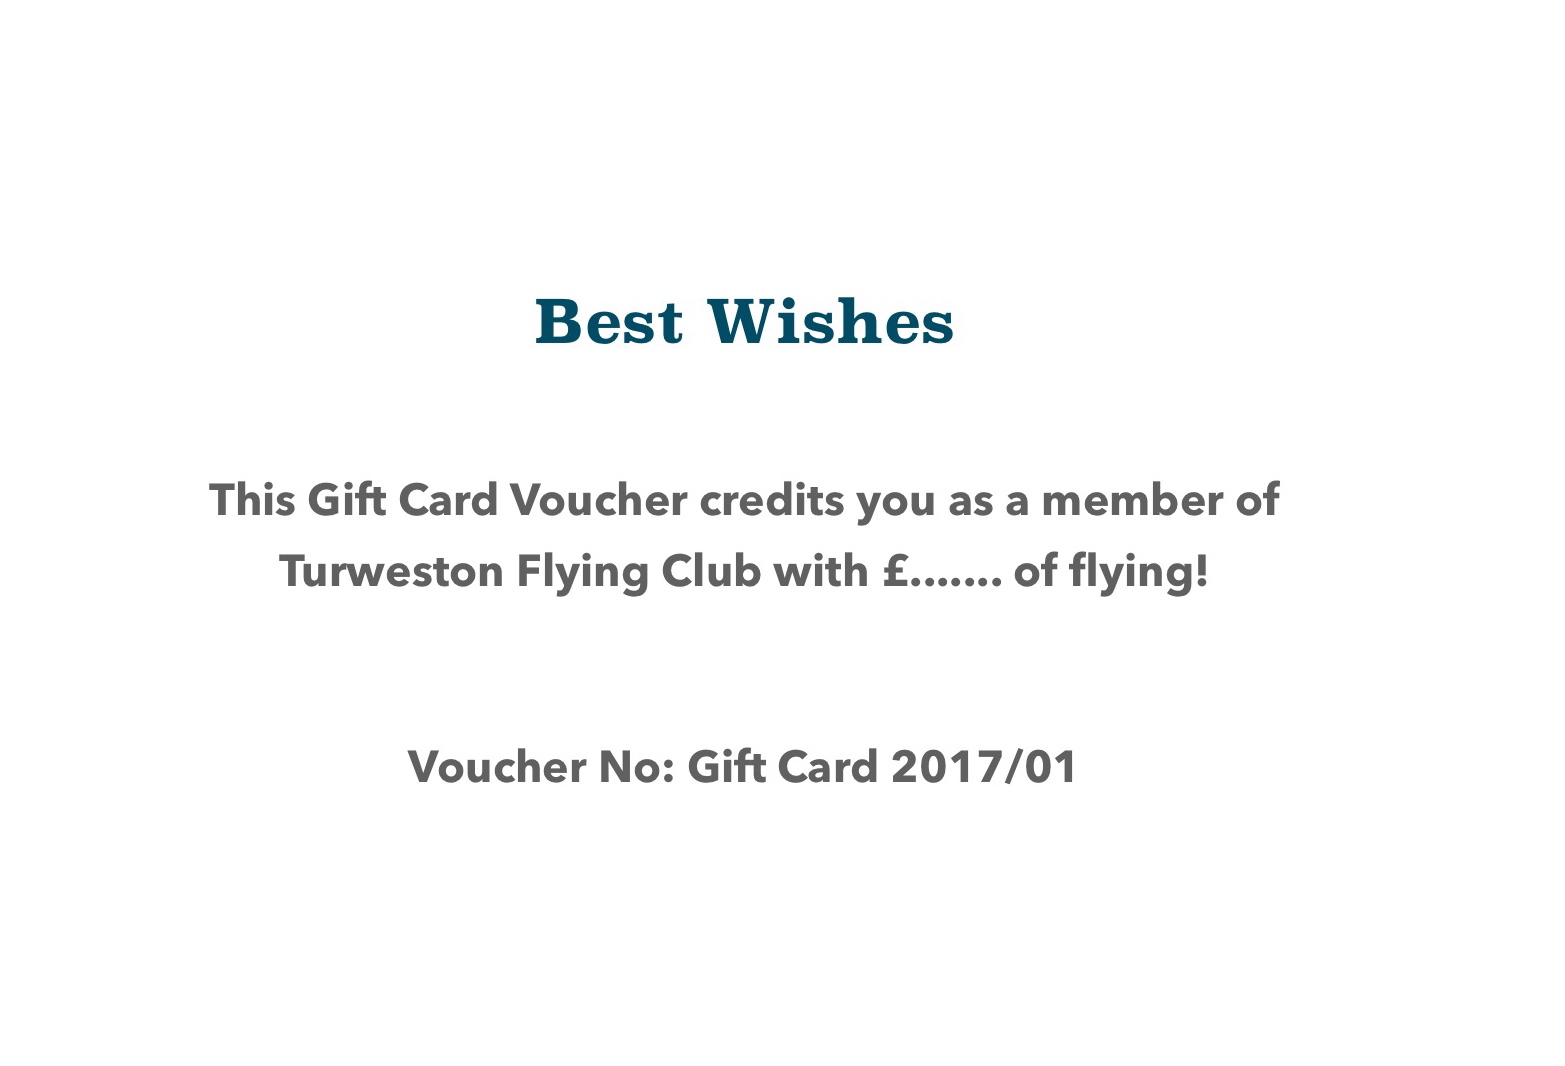 Gift Card Flying Credit for TFC Members